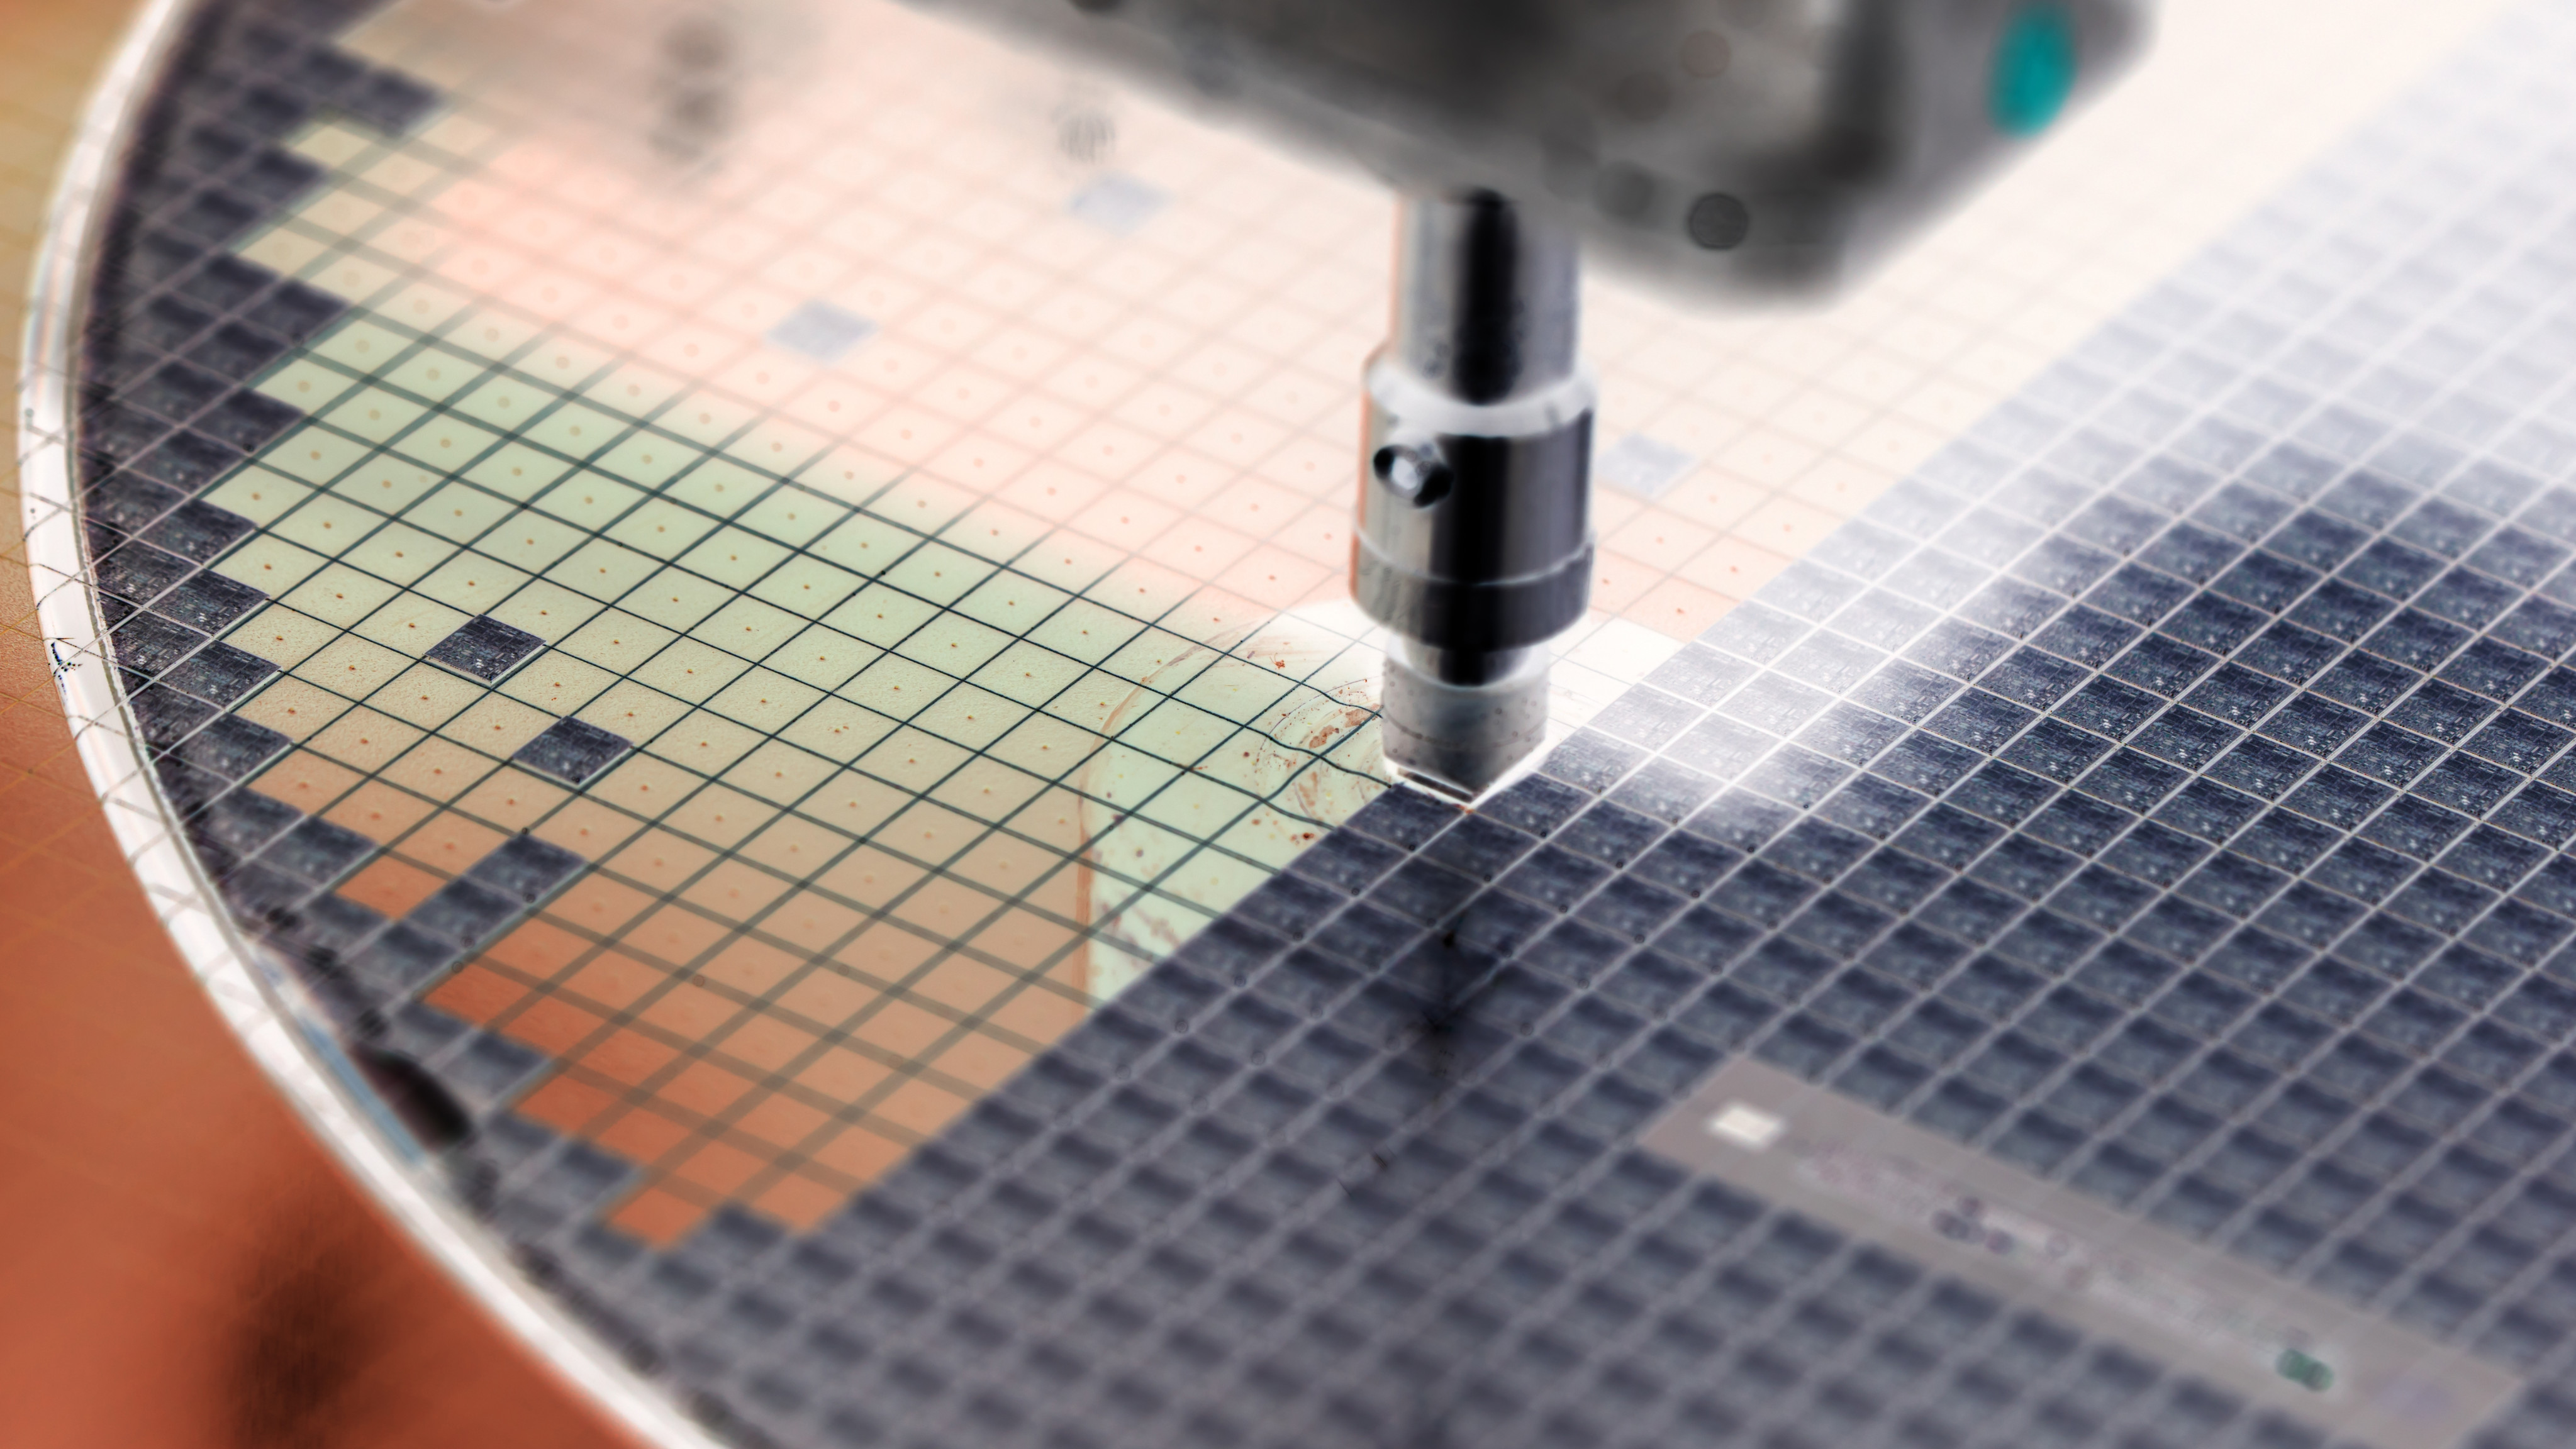 Cutting-edge technology to manufacture microchips could give the Chinese semiconductor industry a way around US sanctions. Photo: Shutterstock